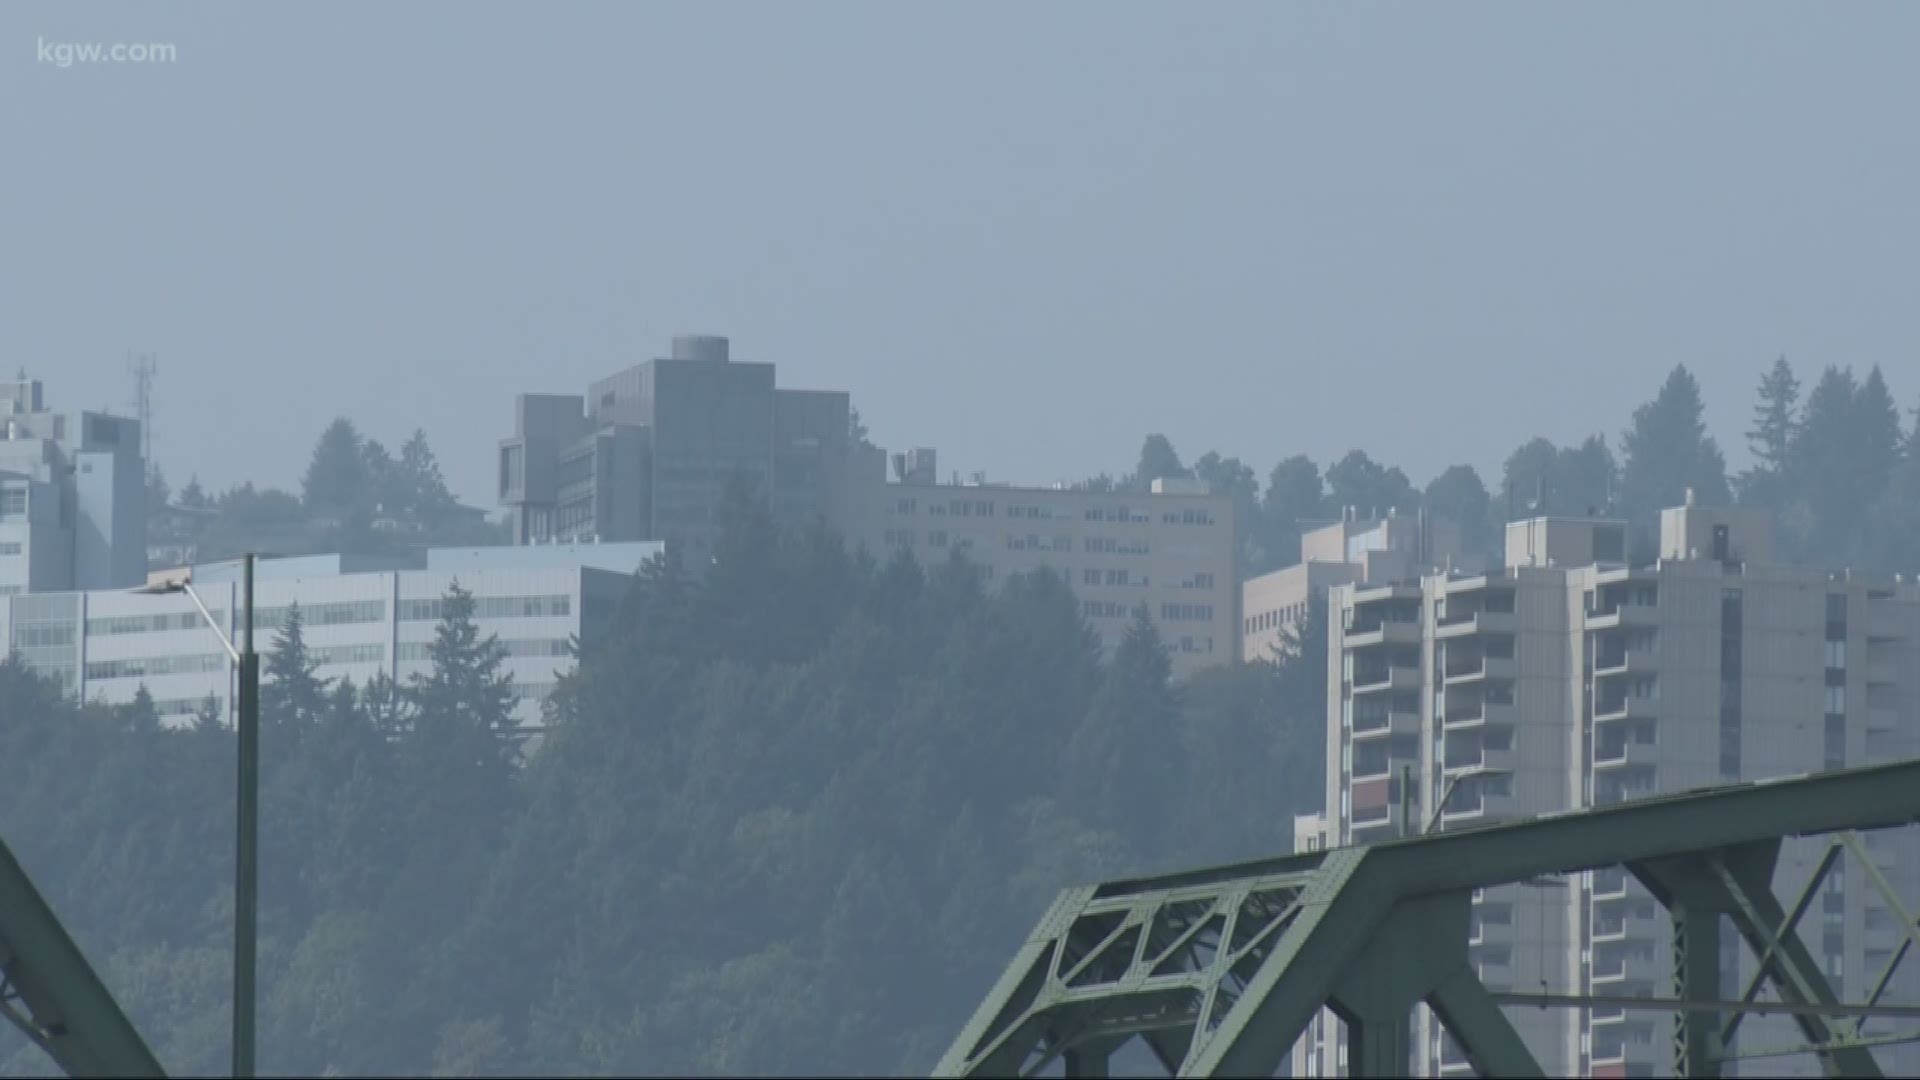 Wildfire smoke has made Portland's air quality one of the worst in the world.